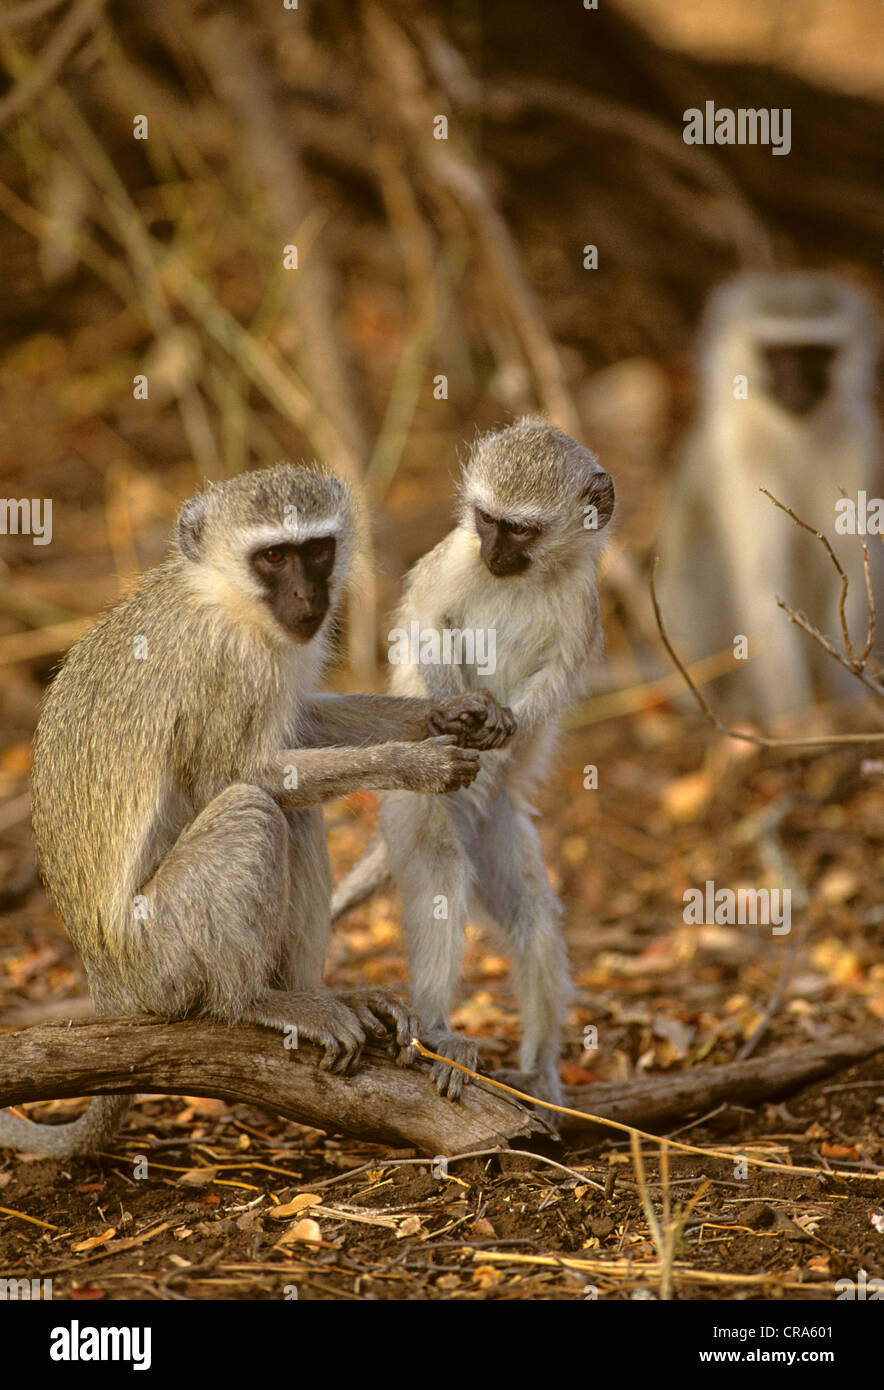 Vervet Monkey (Chlorocebus pygerythrus), female adult and young, Kruger National Park, South Africa, Africa Stock Photo